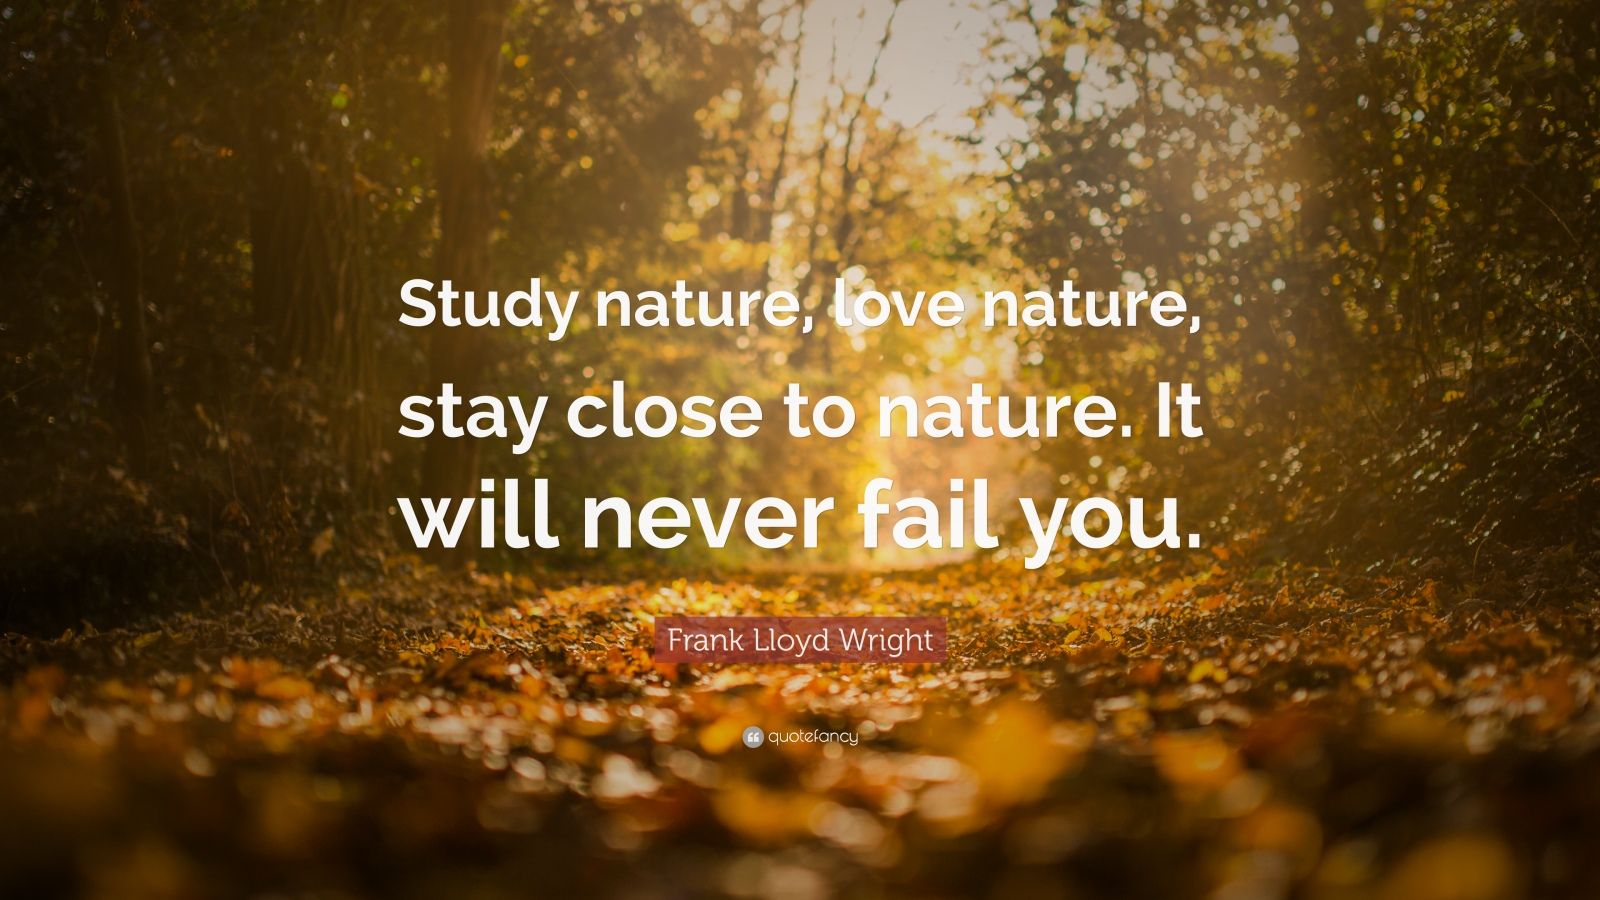 Top 30 Nature Quotes of All Time (2021 Update) - Quotefancy